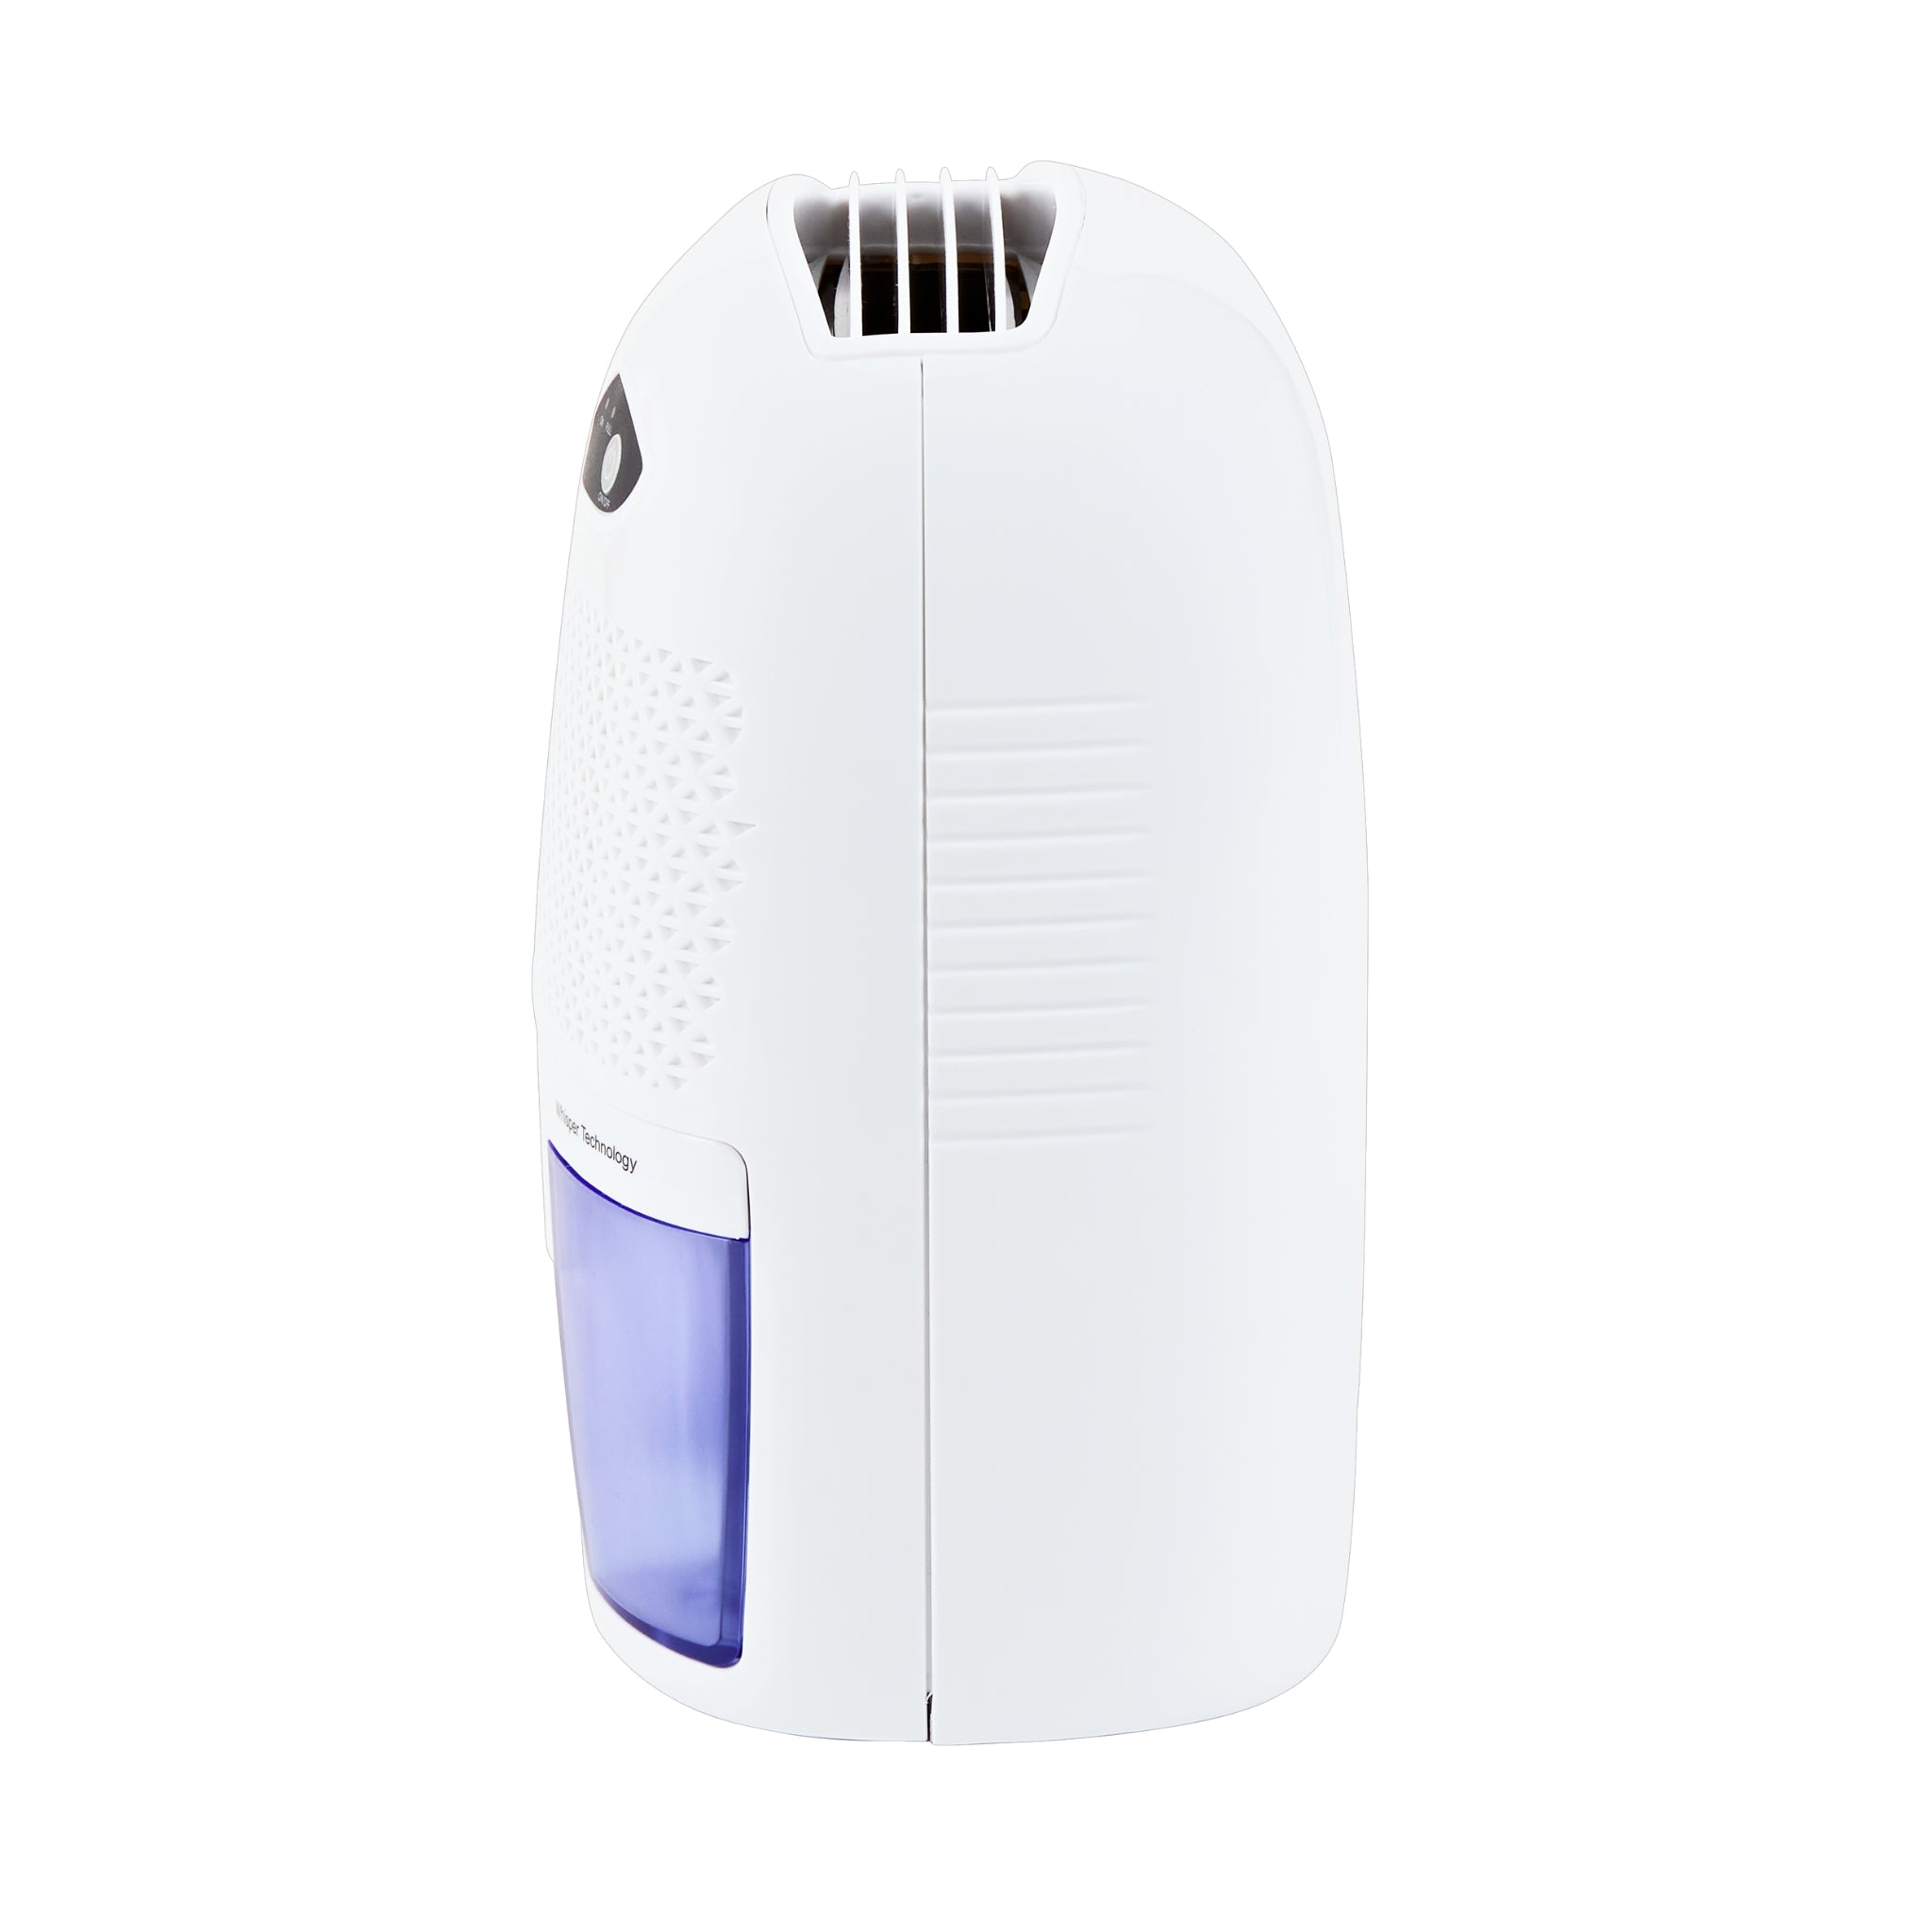 A sleek, mostly white Senelux 250ml dehumidifier. Moisture control vents are on the top of the dehumidifier and visible.